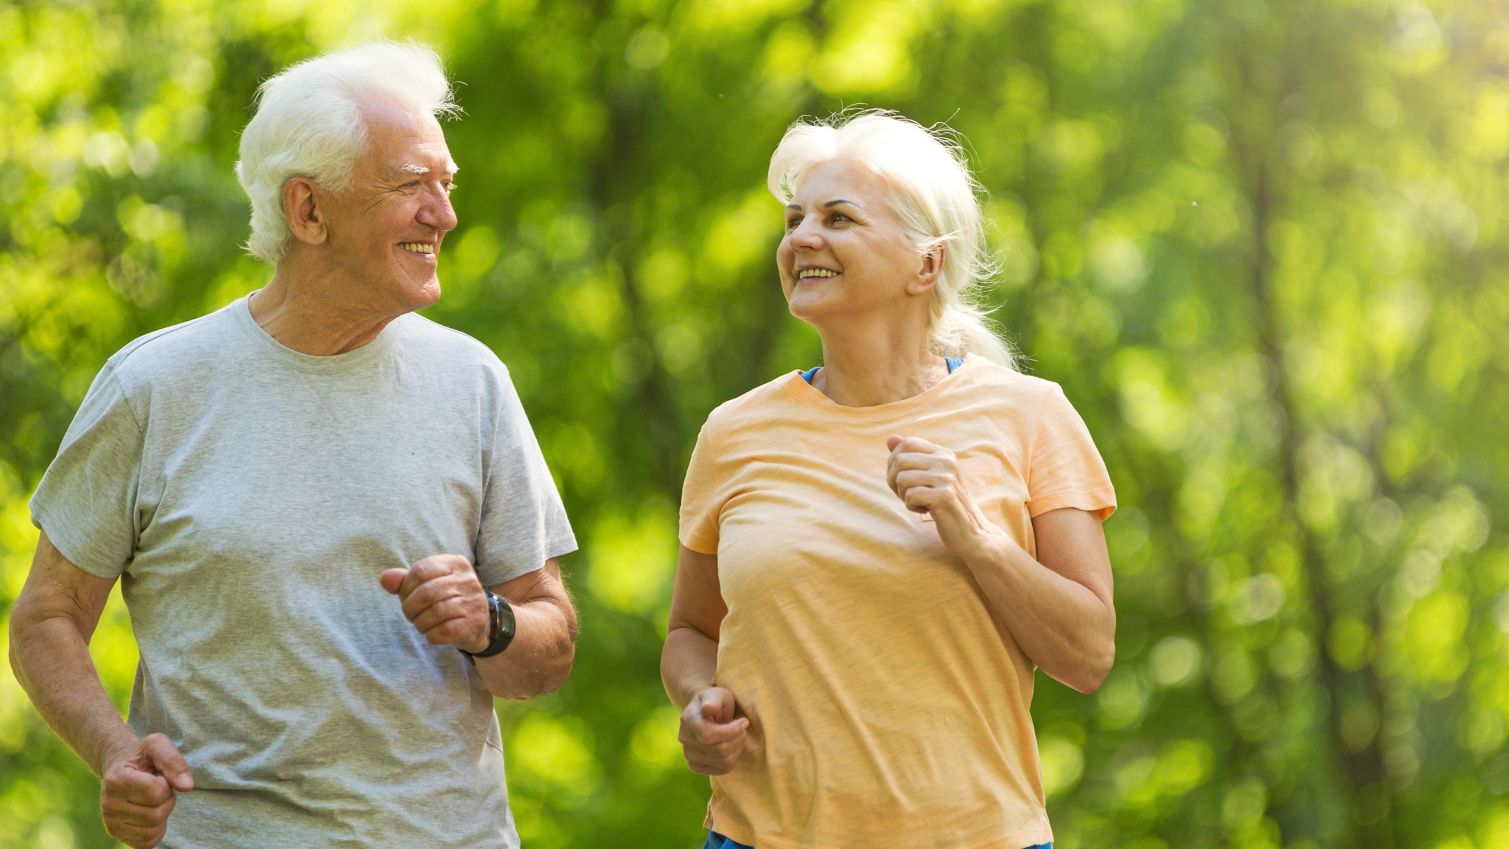 Retired couple taking an outdoor jog together.